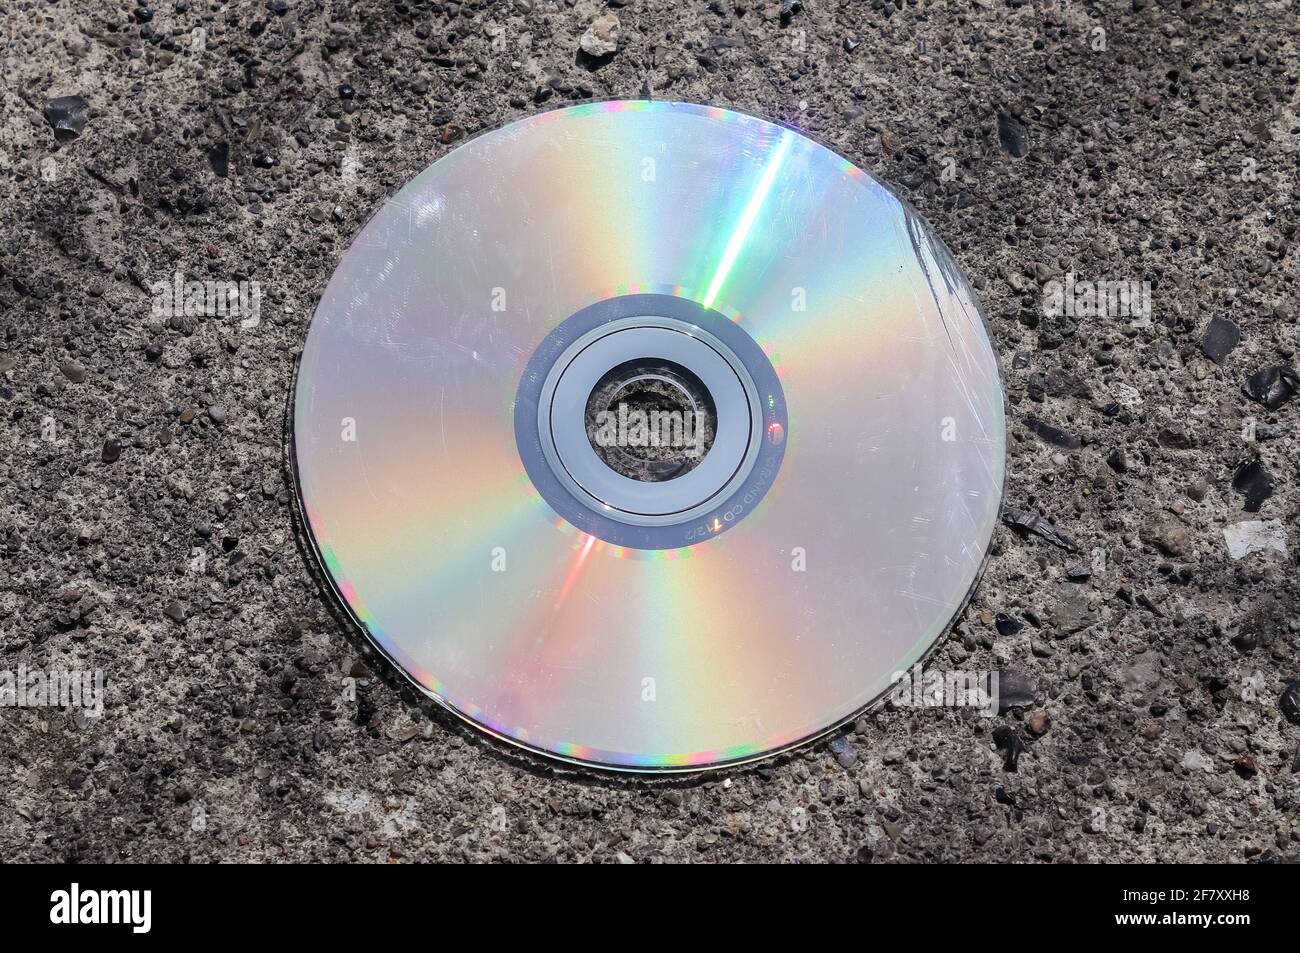 Old used compact disc on an asphalt road Stock Photo